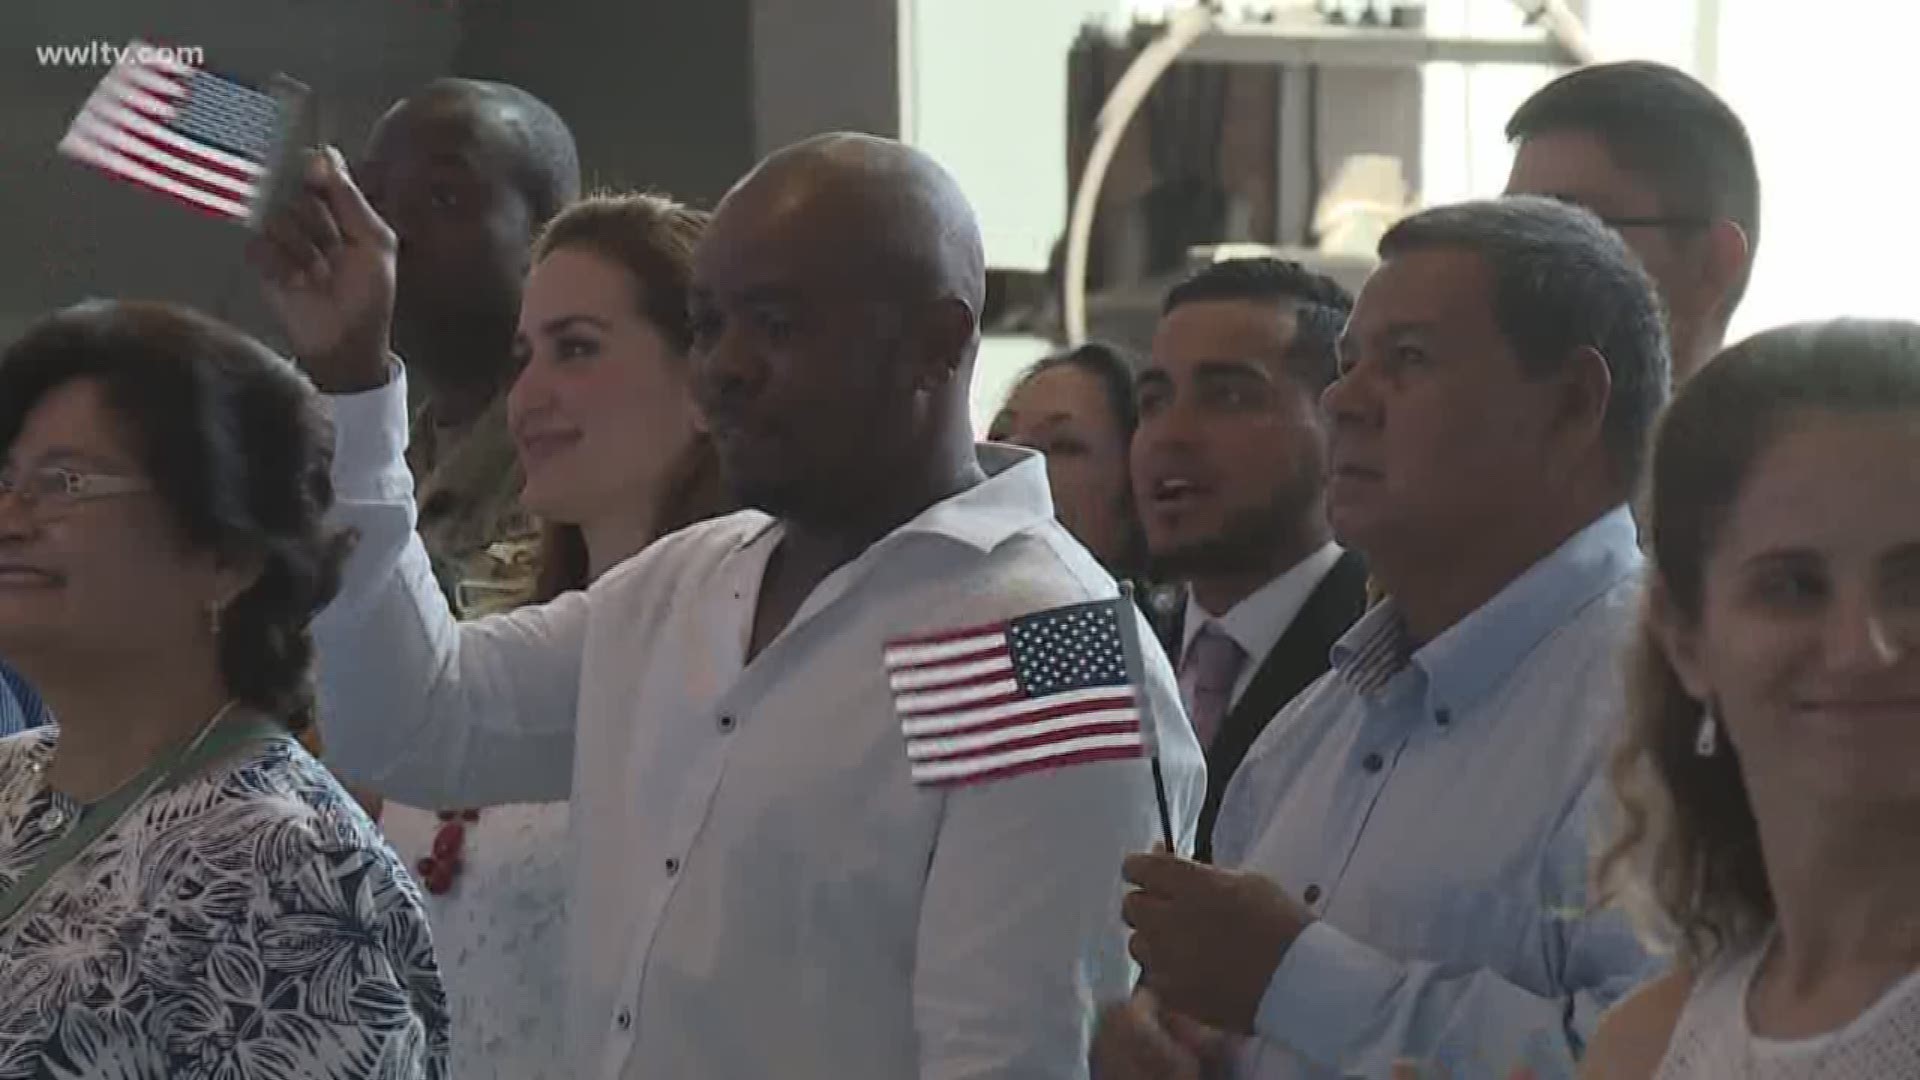 30 new citizens to be sworn in at National World War II Museum